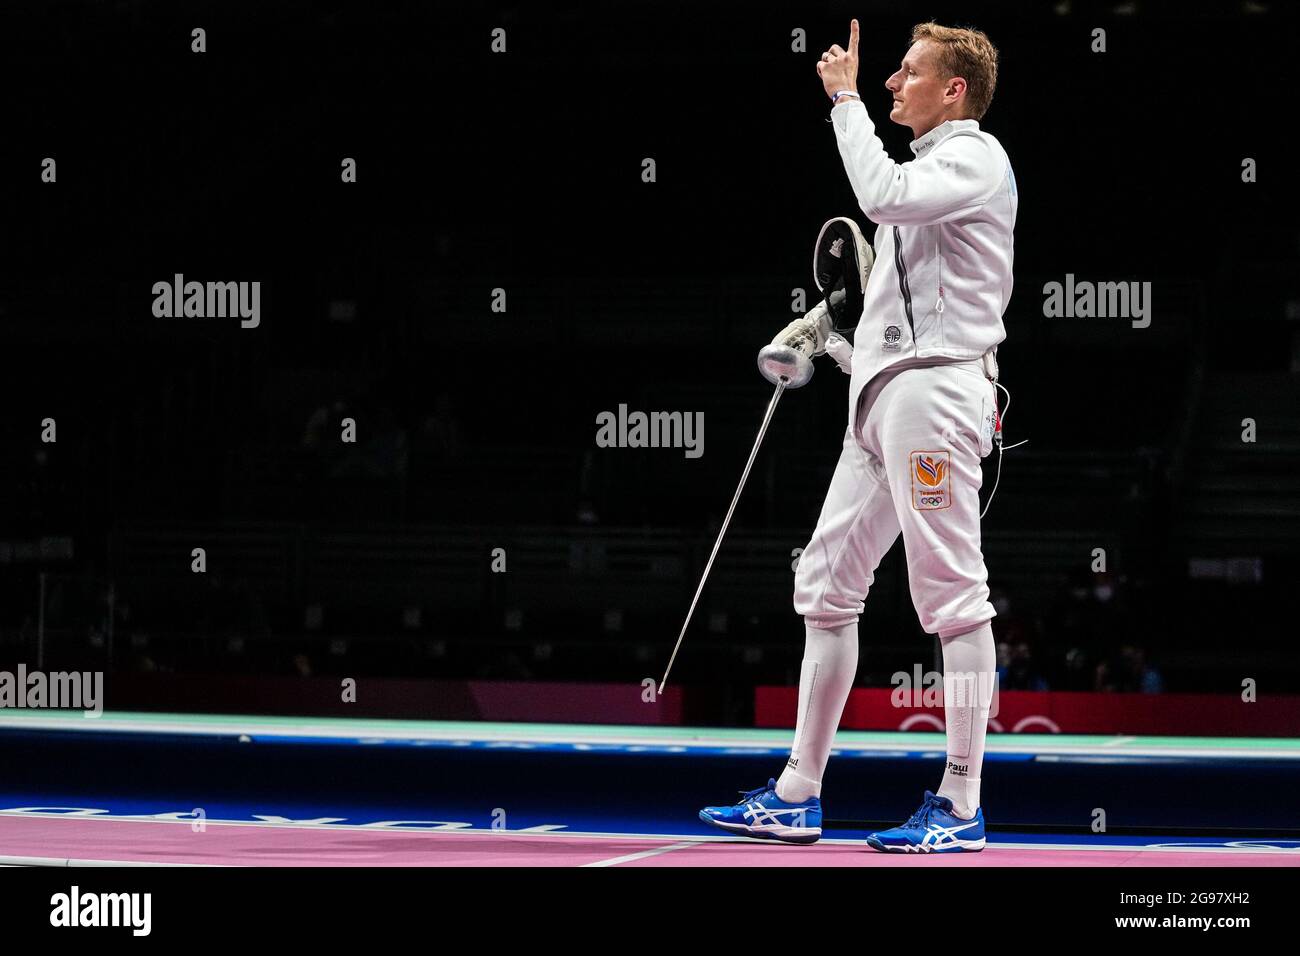 TOKYO, JAPAN - JULY 25: Bas Verwijlen of the Netherlands competing on Men's  Épée Individual Table of 32 during the Tokyo 2020 Olympic Games at the  Makuhari Messe on July 25, 2021